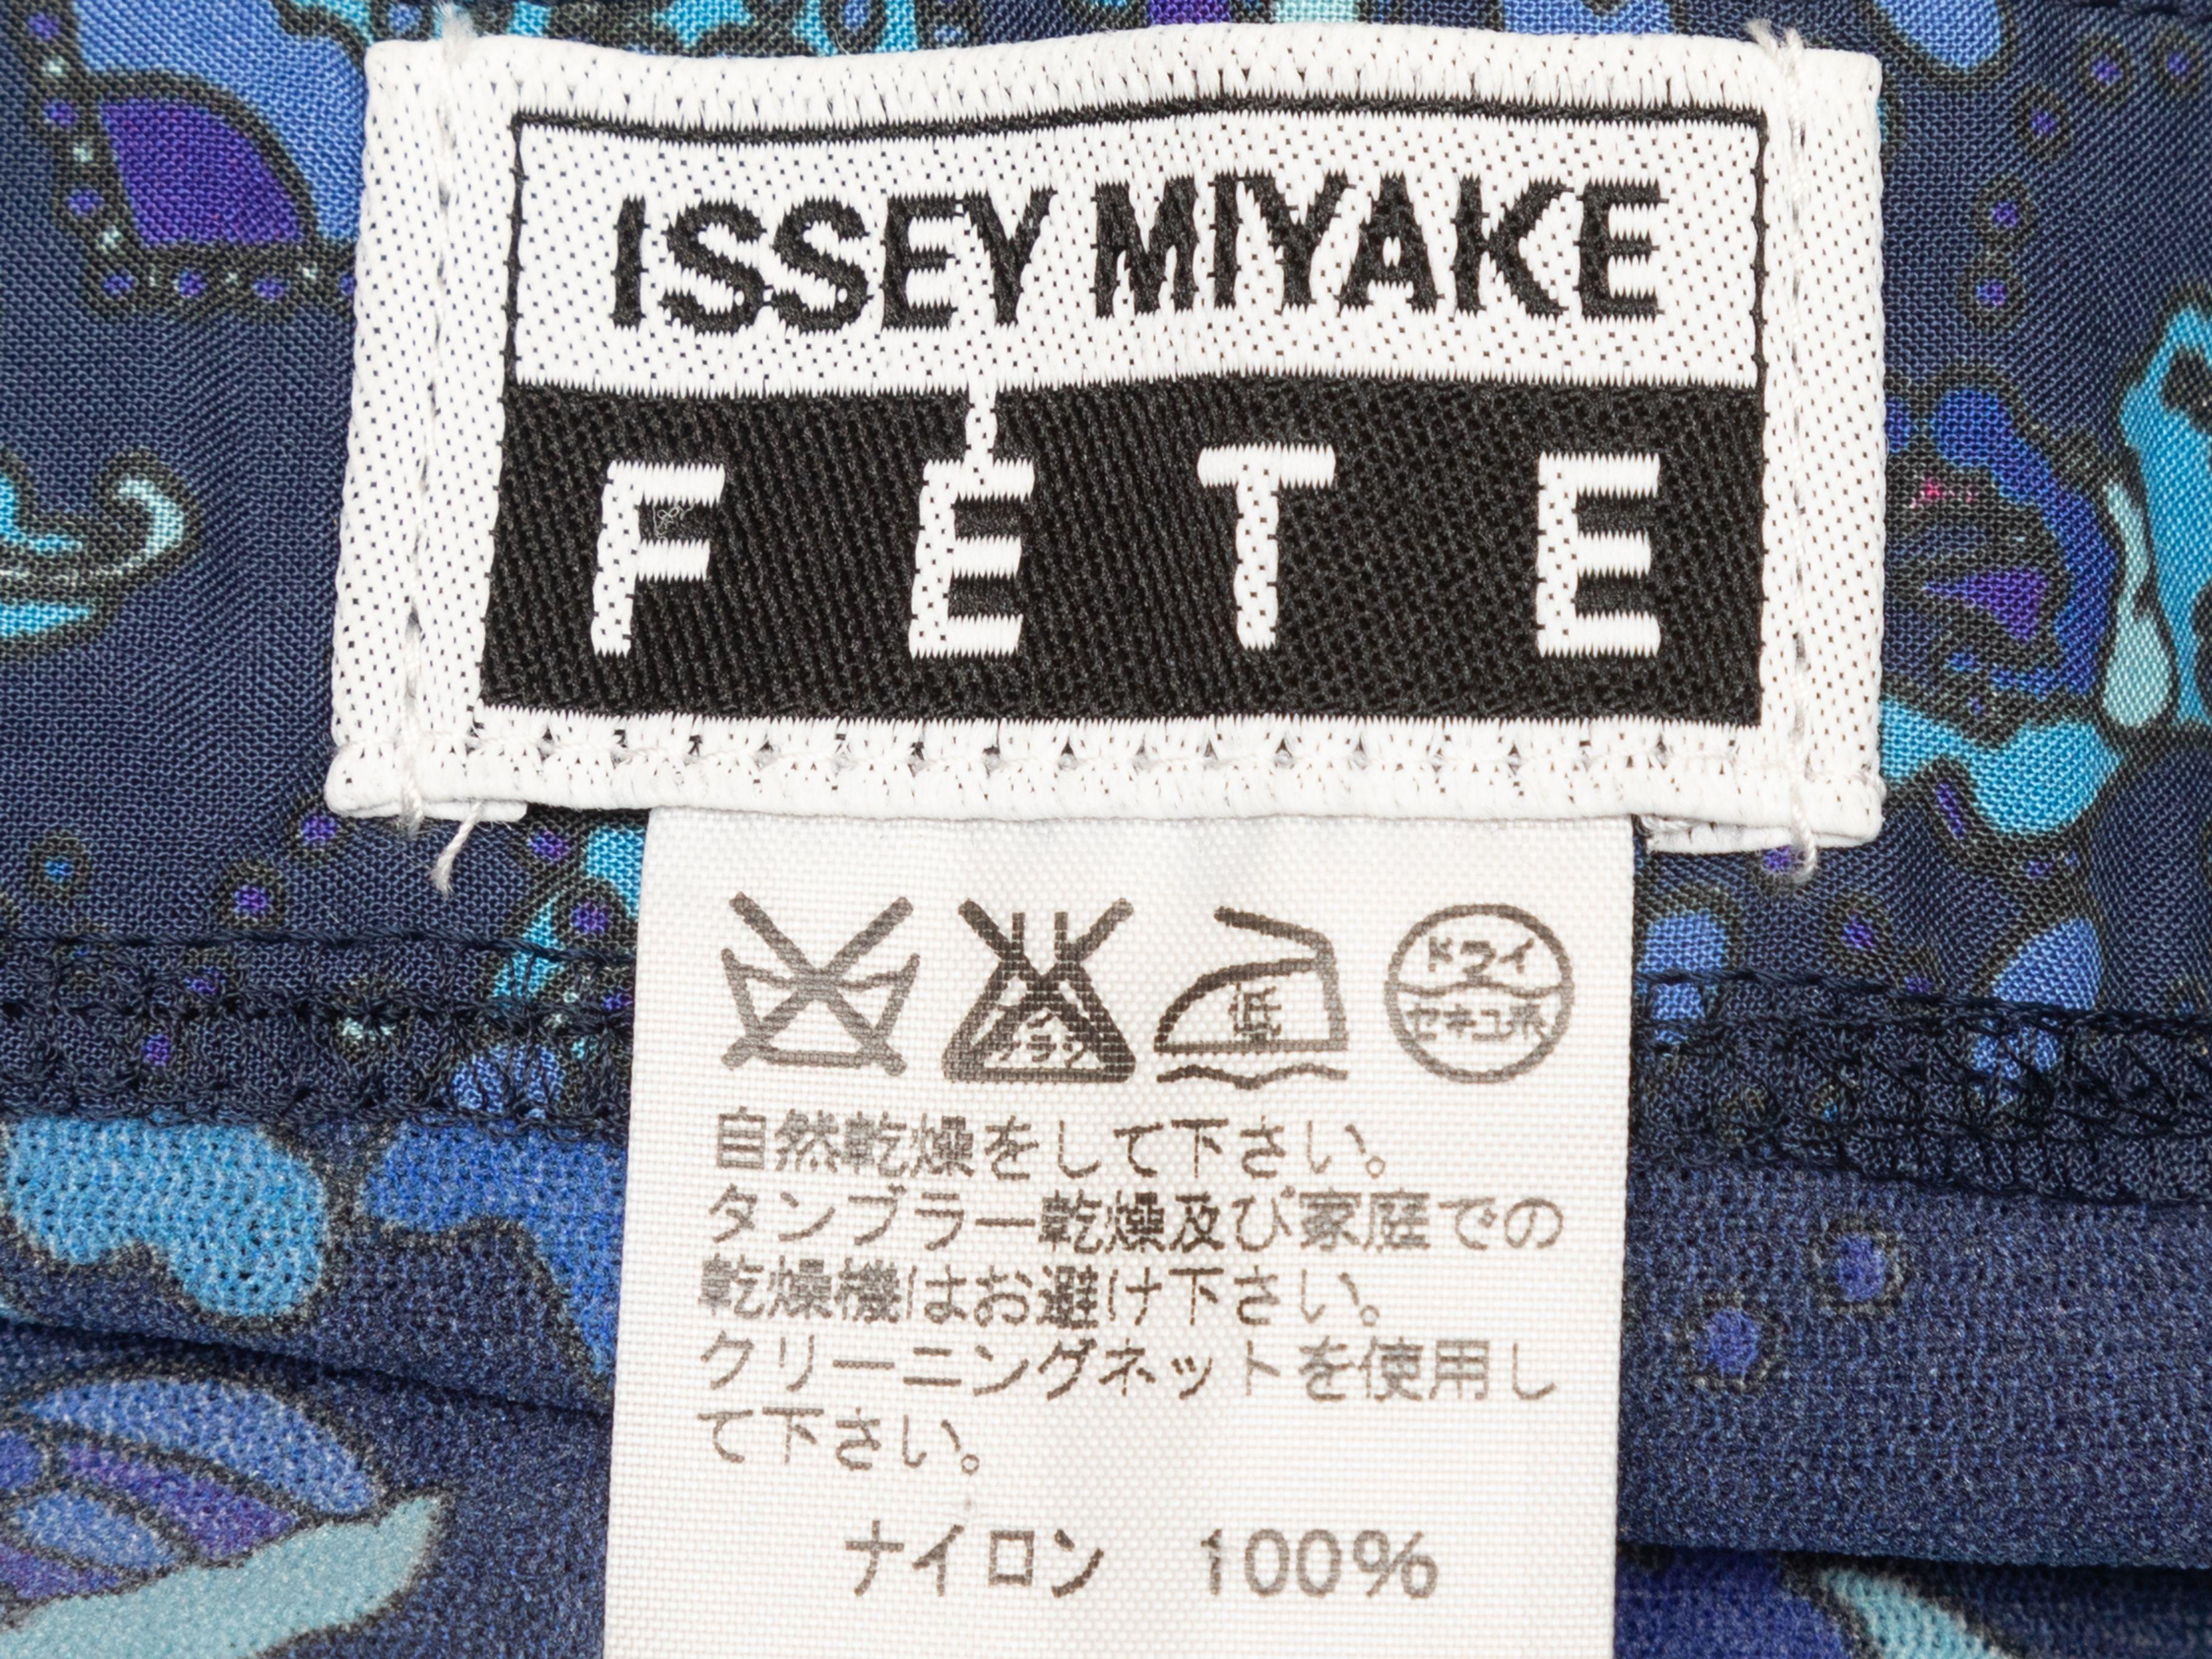 Product Details: Navy and multicolor abstract print skirt by Issey Miyake Fete. Elasticized waistband. Ruffle trim at sides. 28